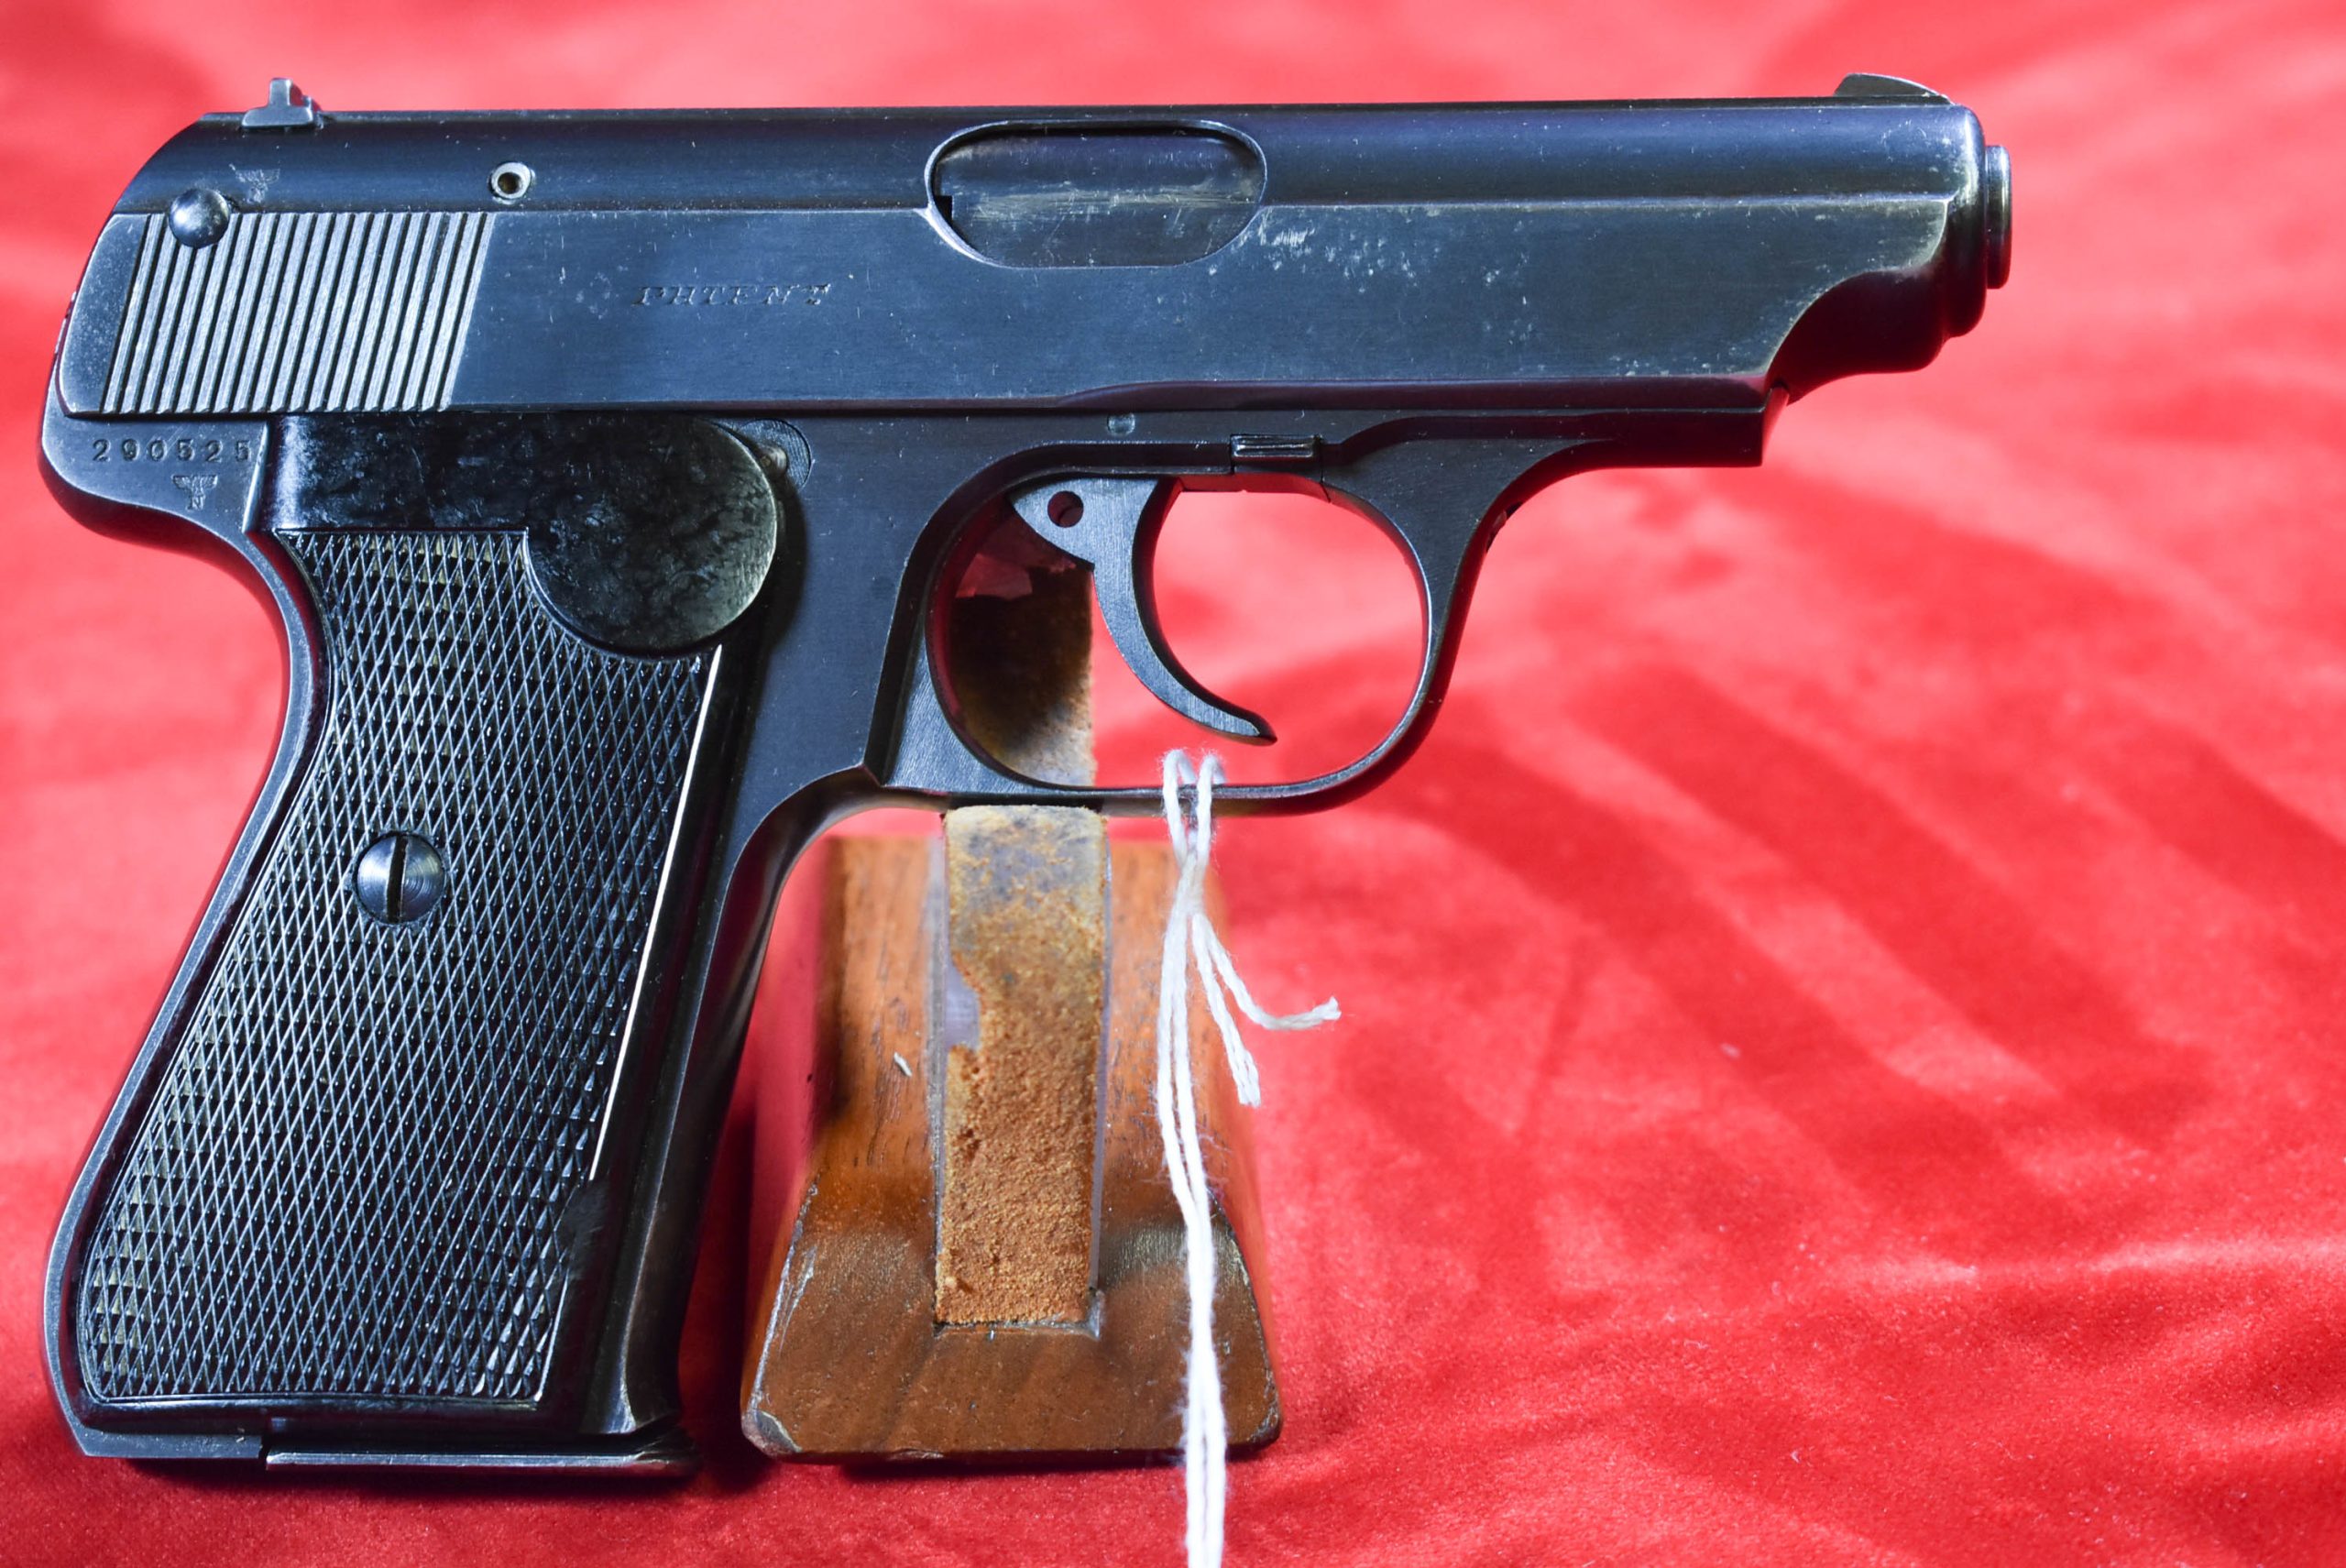 SOLD VERY CHOICE, EARLY 1941 NAZI POLICE SAUER 38H PISTOL, NAZI POLICE  “EAGLE/C” MARKED, FULL RIG, MINT CRISP! - Pre98 Antiques